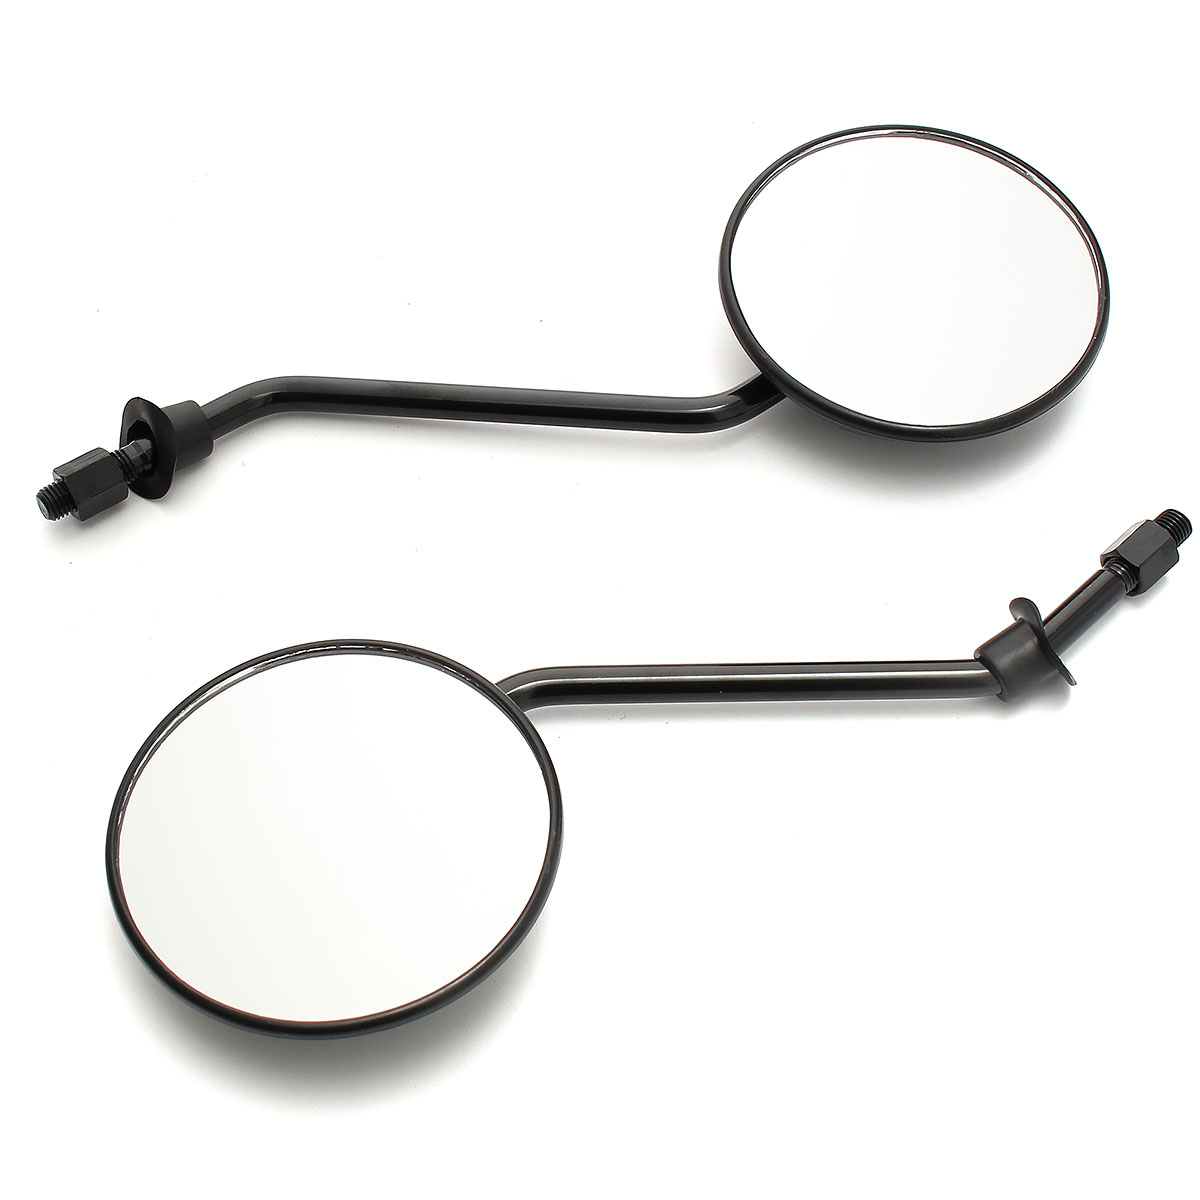 Round Rear View Side Mirrors Universal For Motorcycle Scooter ATV 